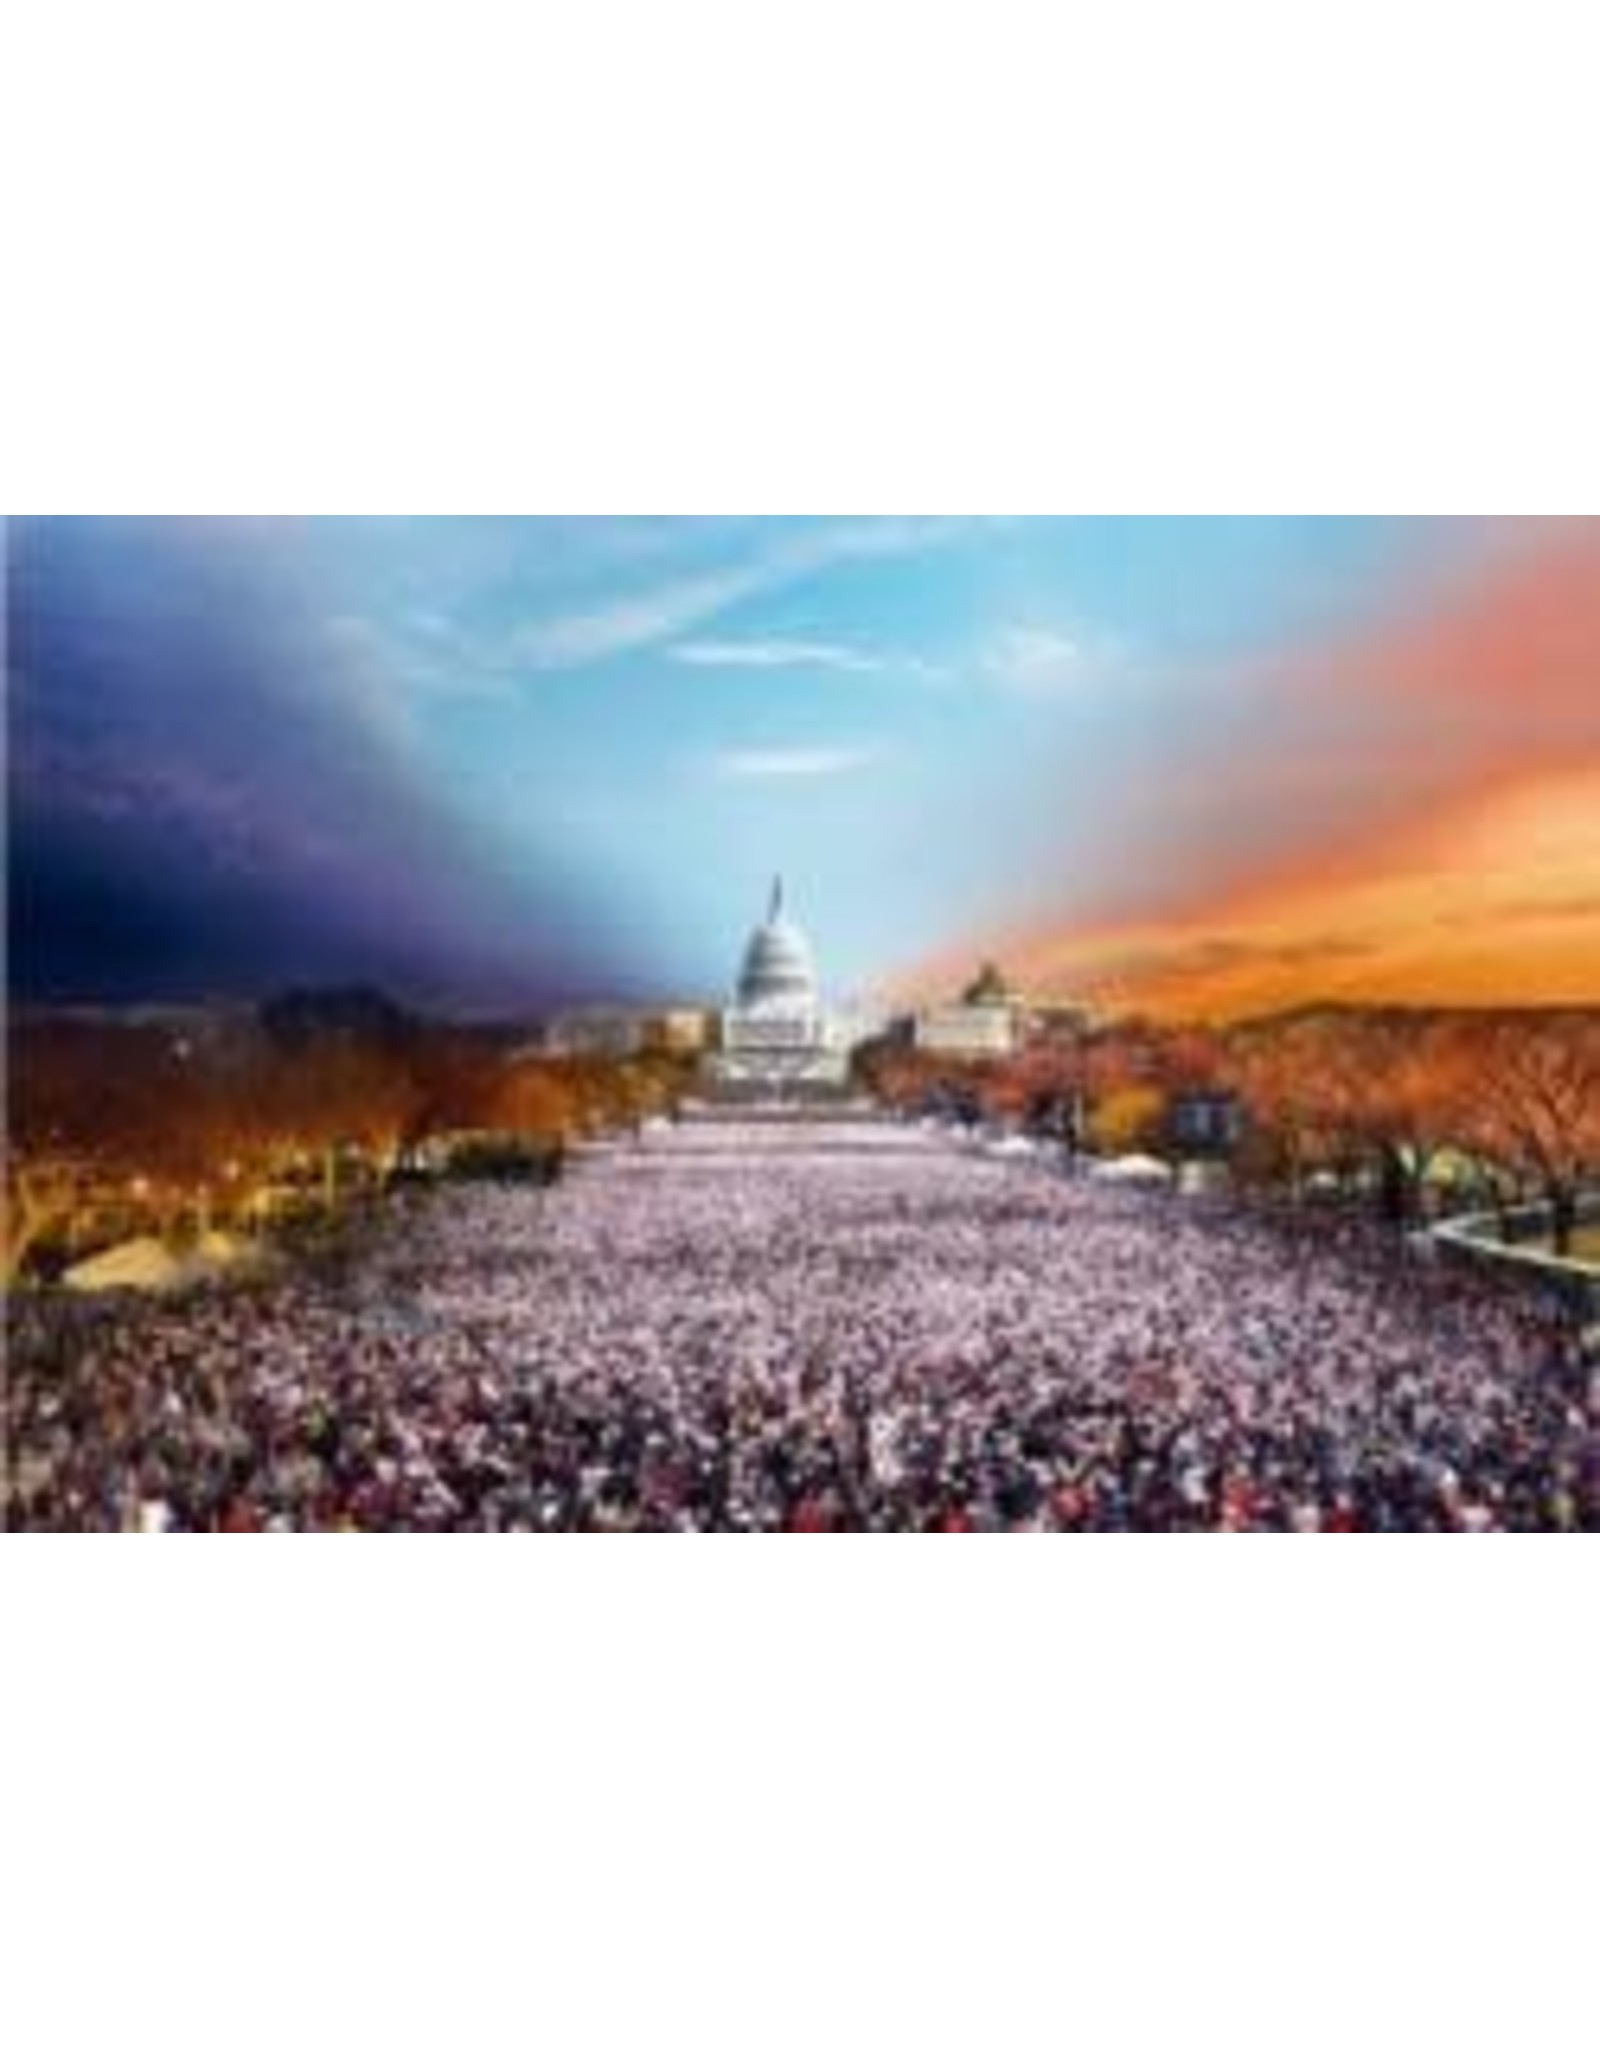 Stephen Wilkes Puzzle 1014P - Stephen Wilkes day to night - Presidential inauguration washington D.C